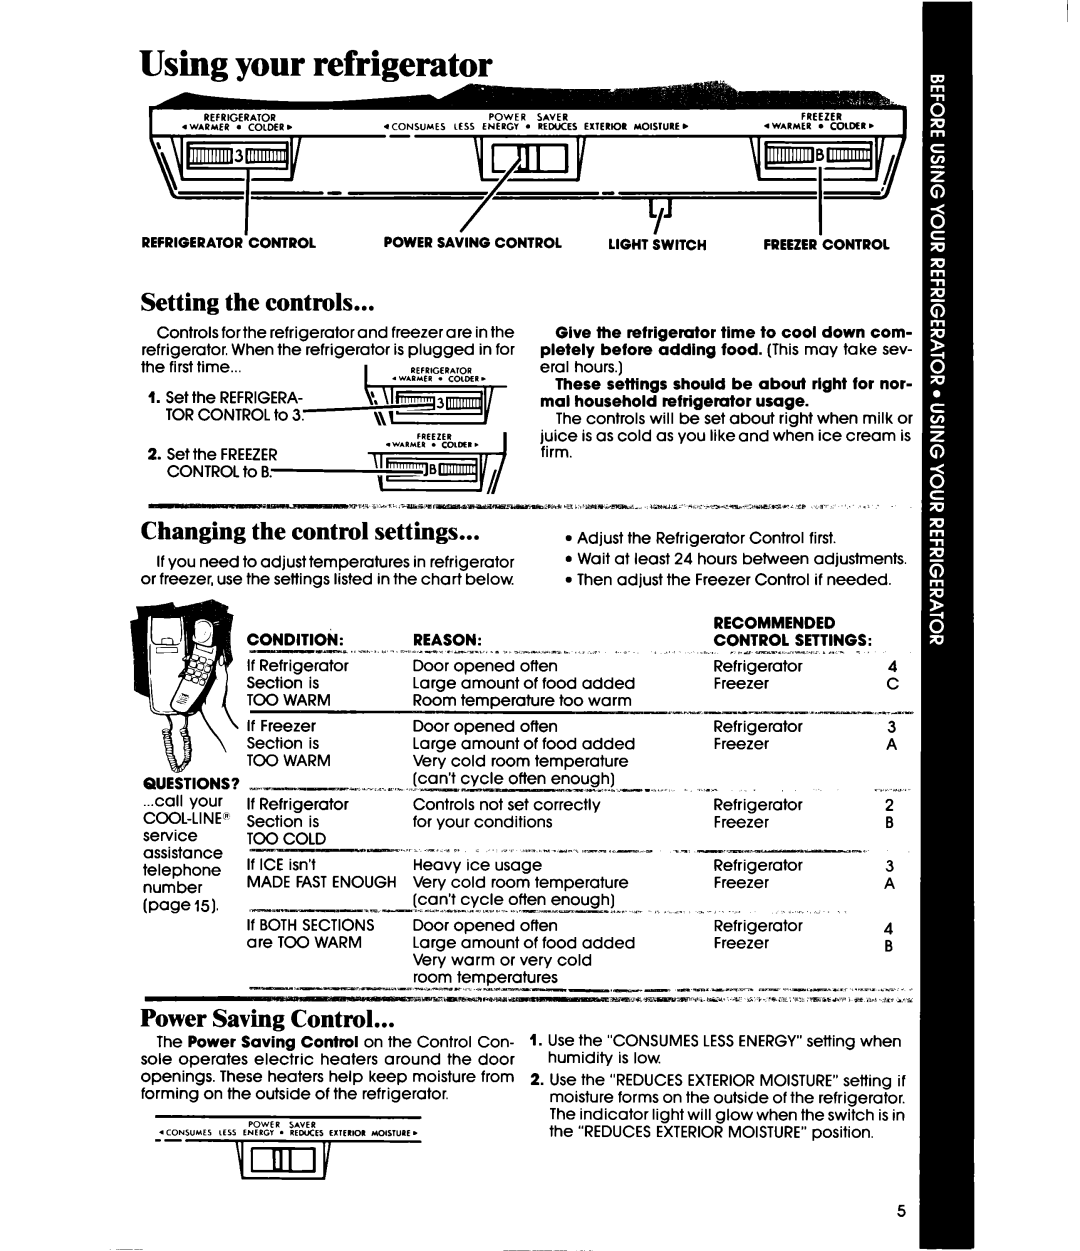 Whirlpool ETl4JM manual Using your refrigerator, Setting, the controls, Changing the control settings, Power Saving Control 